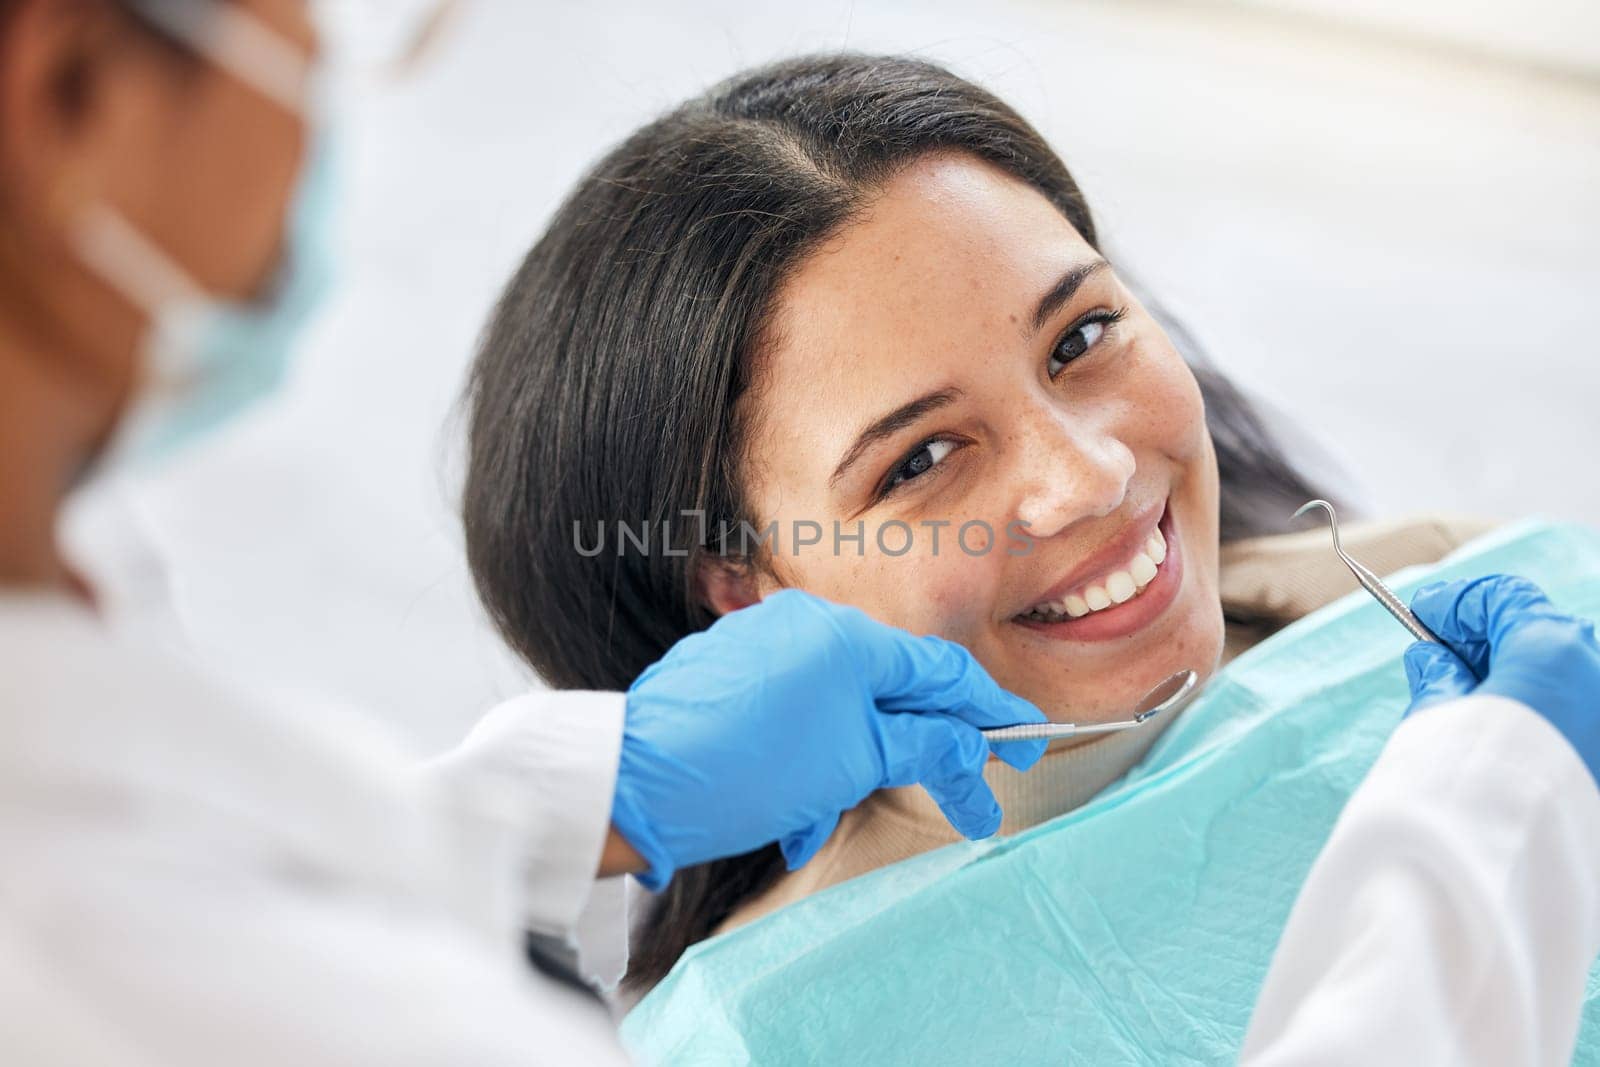 Dentist, dental care and teeth smile of a woman with tools and hands of a professional by mouth. Portrait of a female patient for orthodontics, healthcare and cleaning or inspection for oral health.